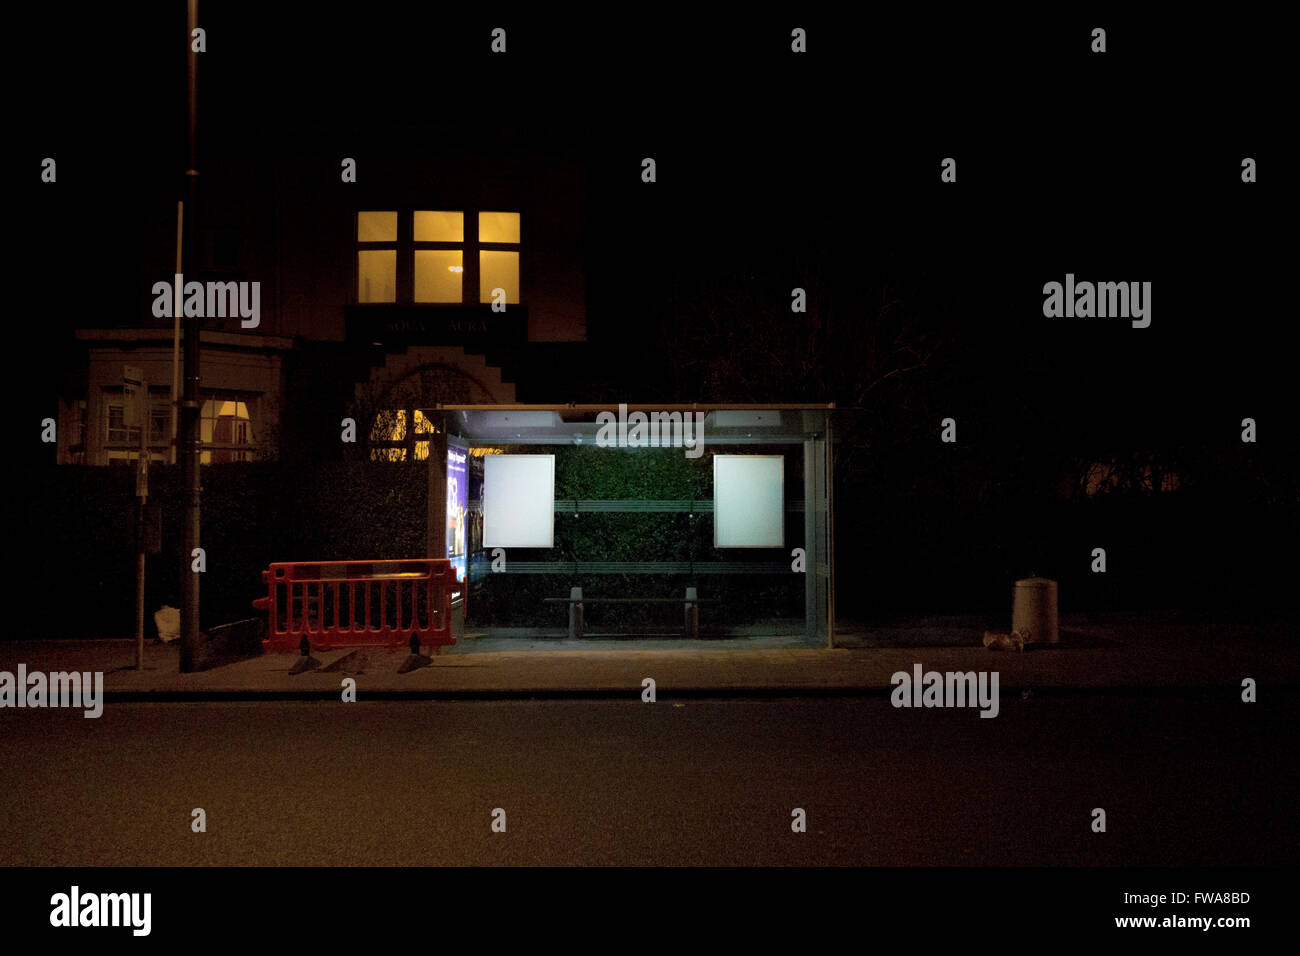 An empty bus stop in Belgium at night, lit by artificial street light. Stock Photo